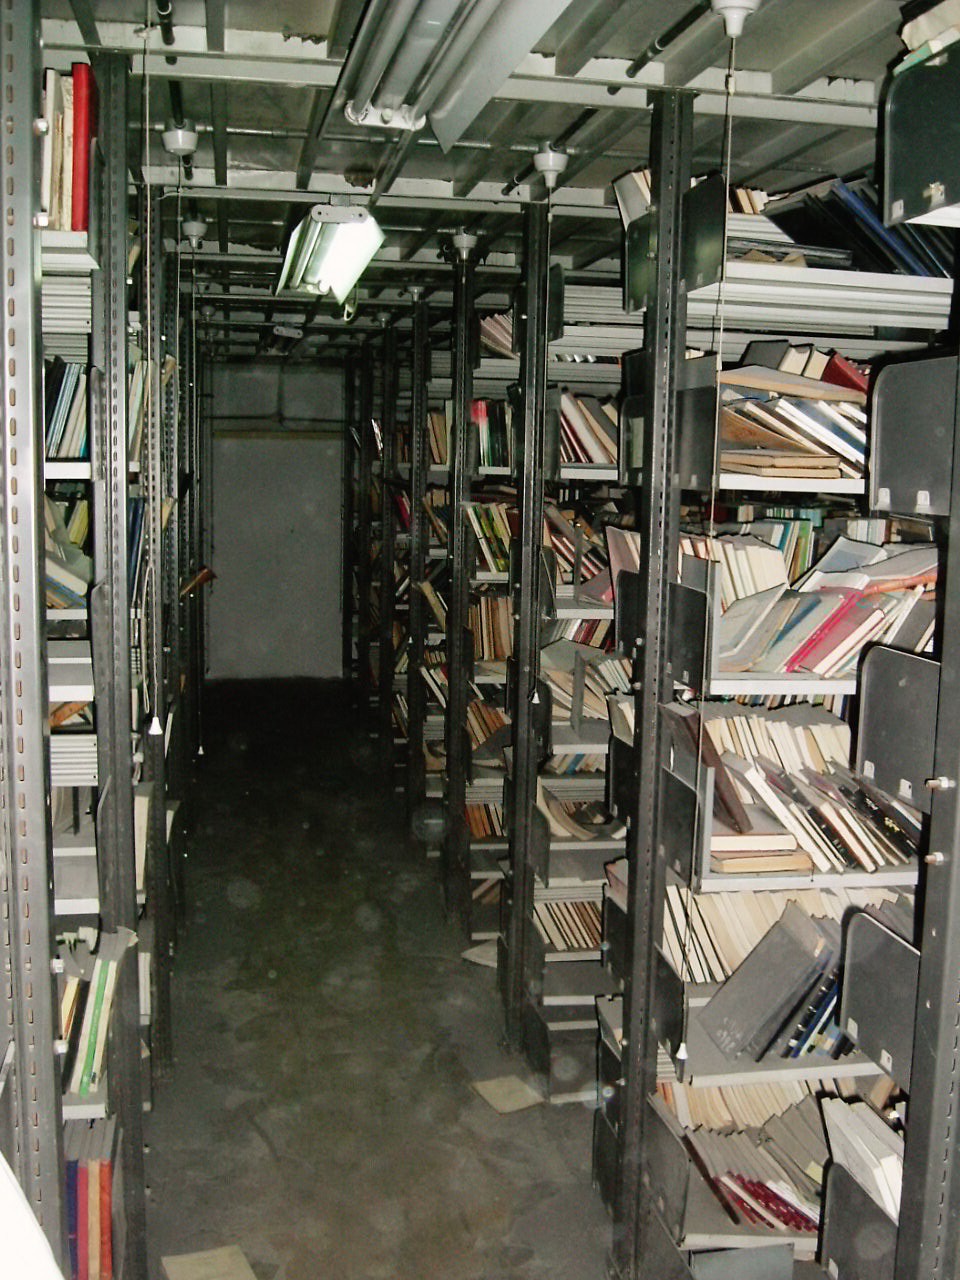 The stacks disorganized but unharmed